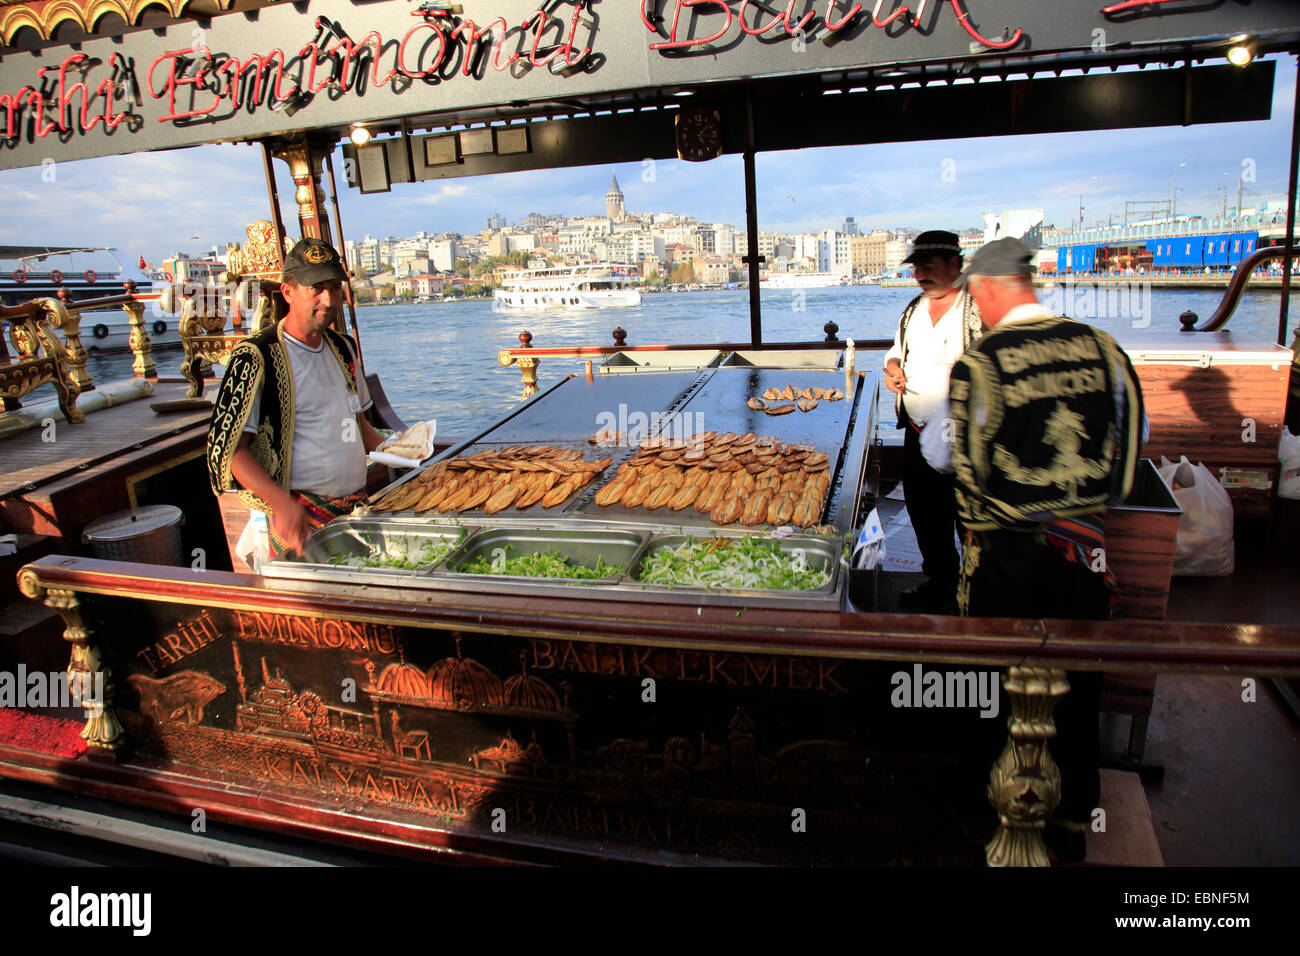 ship with fast food and fish in harbour, Turkey, Istanbul Stock Photo